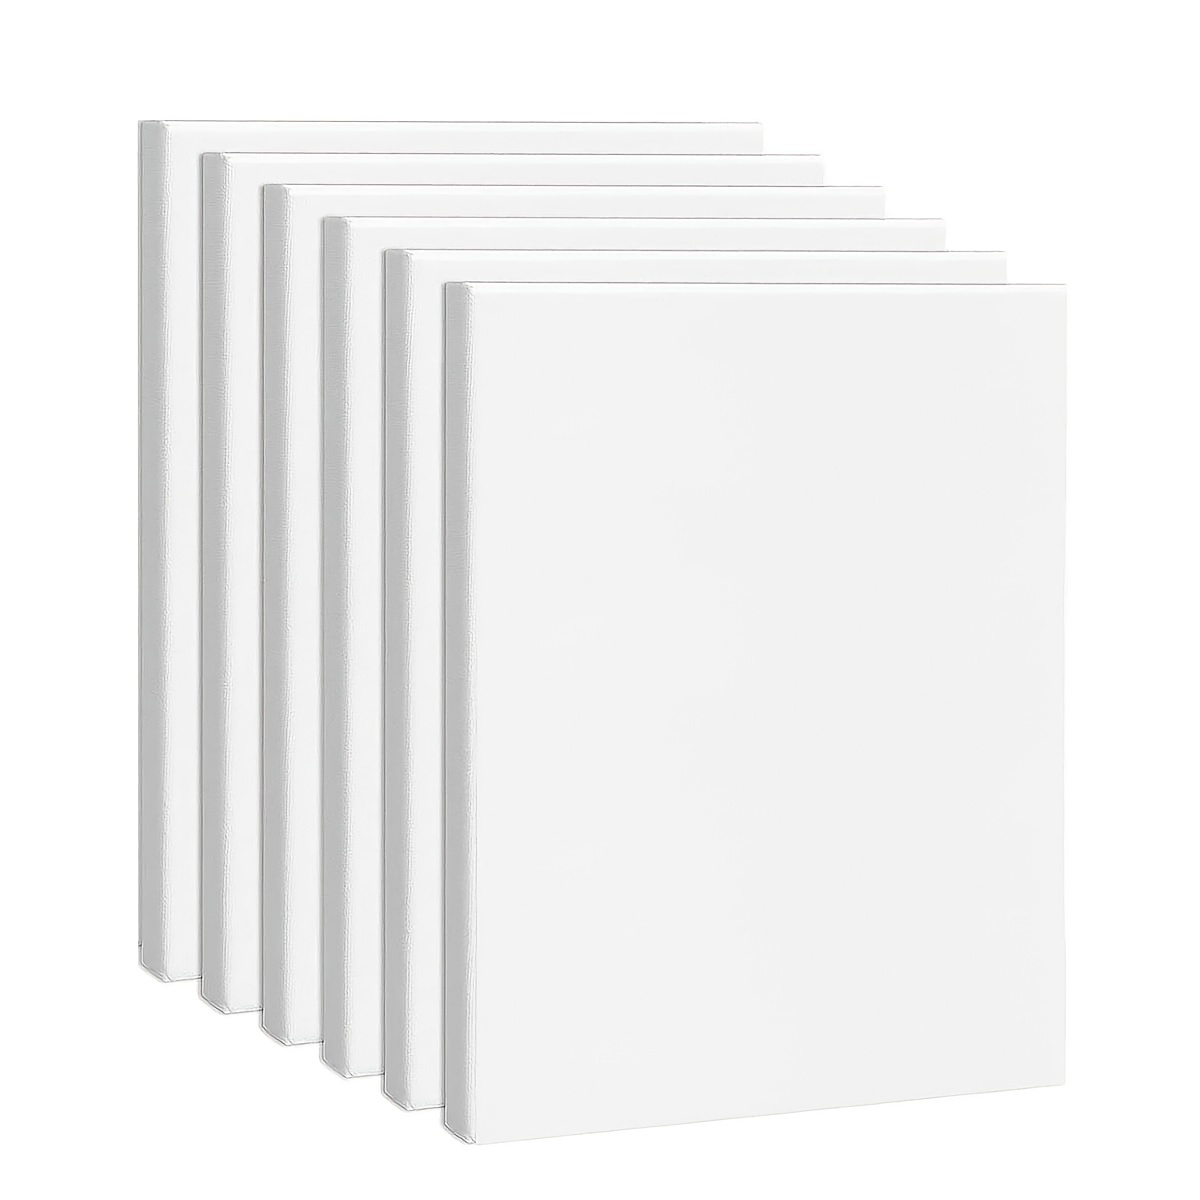 Stretched Canvases for Painting 5 Pack 16x20 inch, 100% Cotton 12.3 oz Triple Primed Painting Canvas, 3/4 Profile Acid-Free Large Paint Canvas